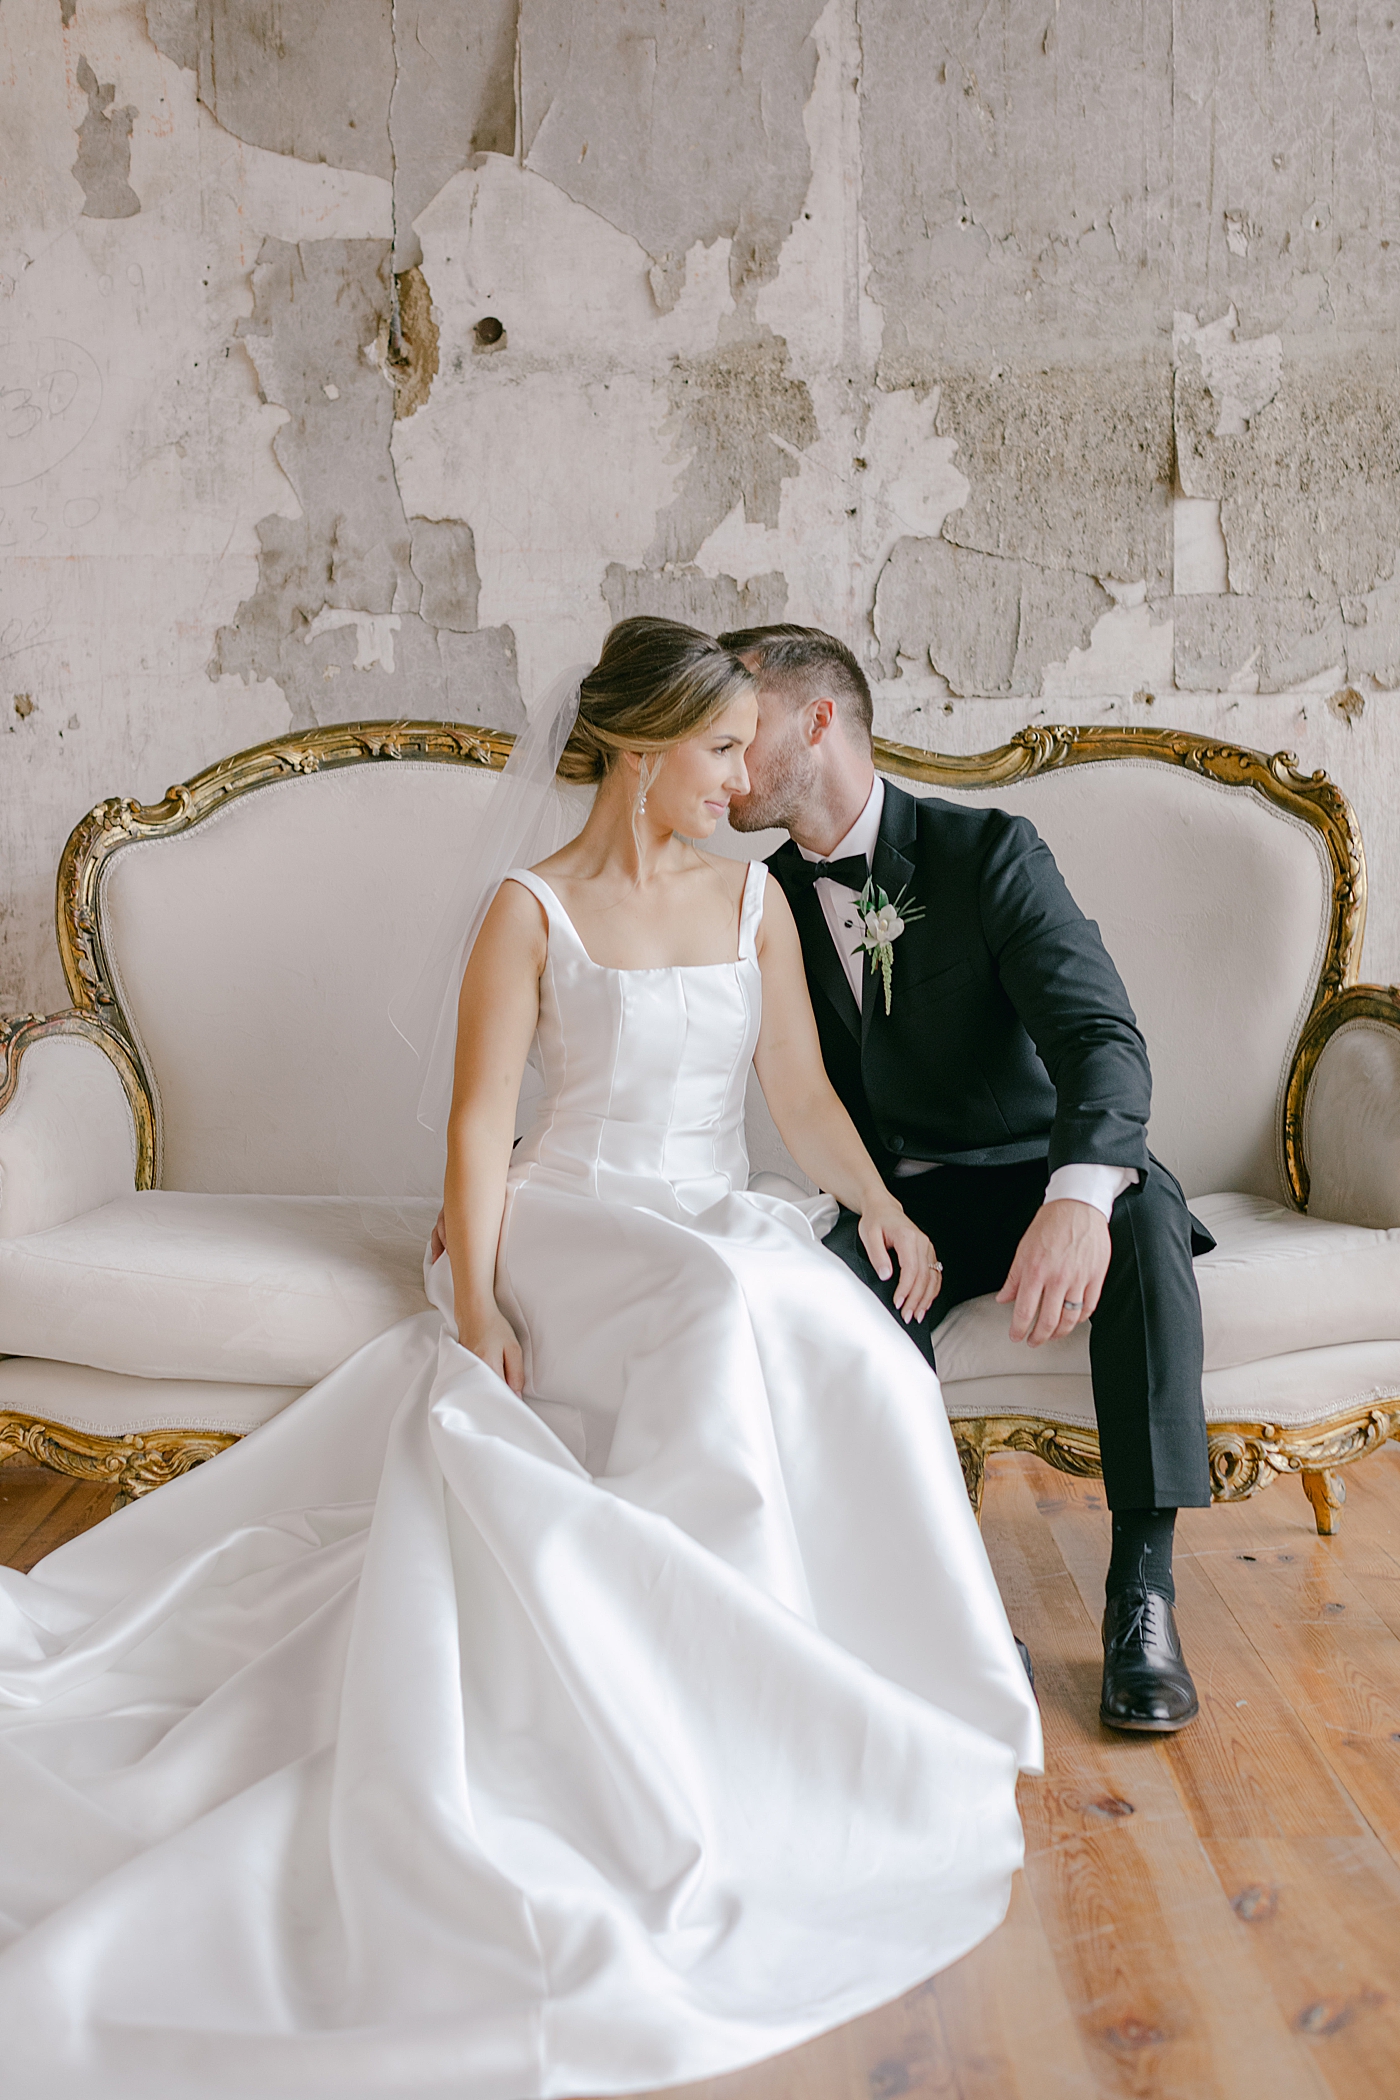 Bride and groom sitting on a sofa together | Photo by Hope Helmuth Photography